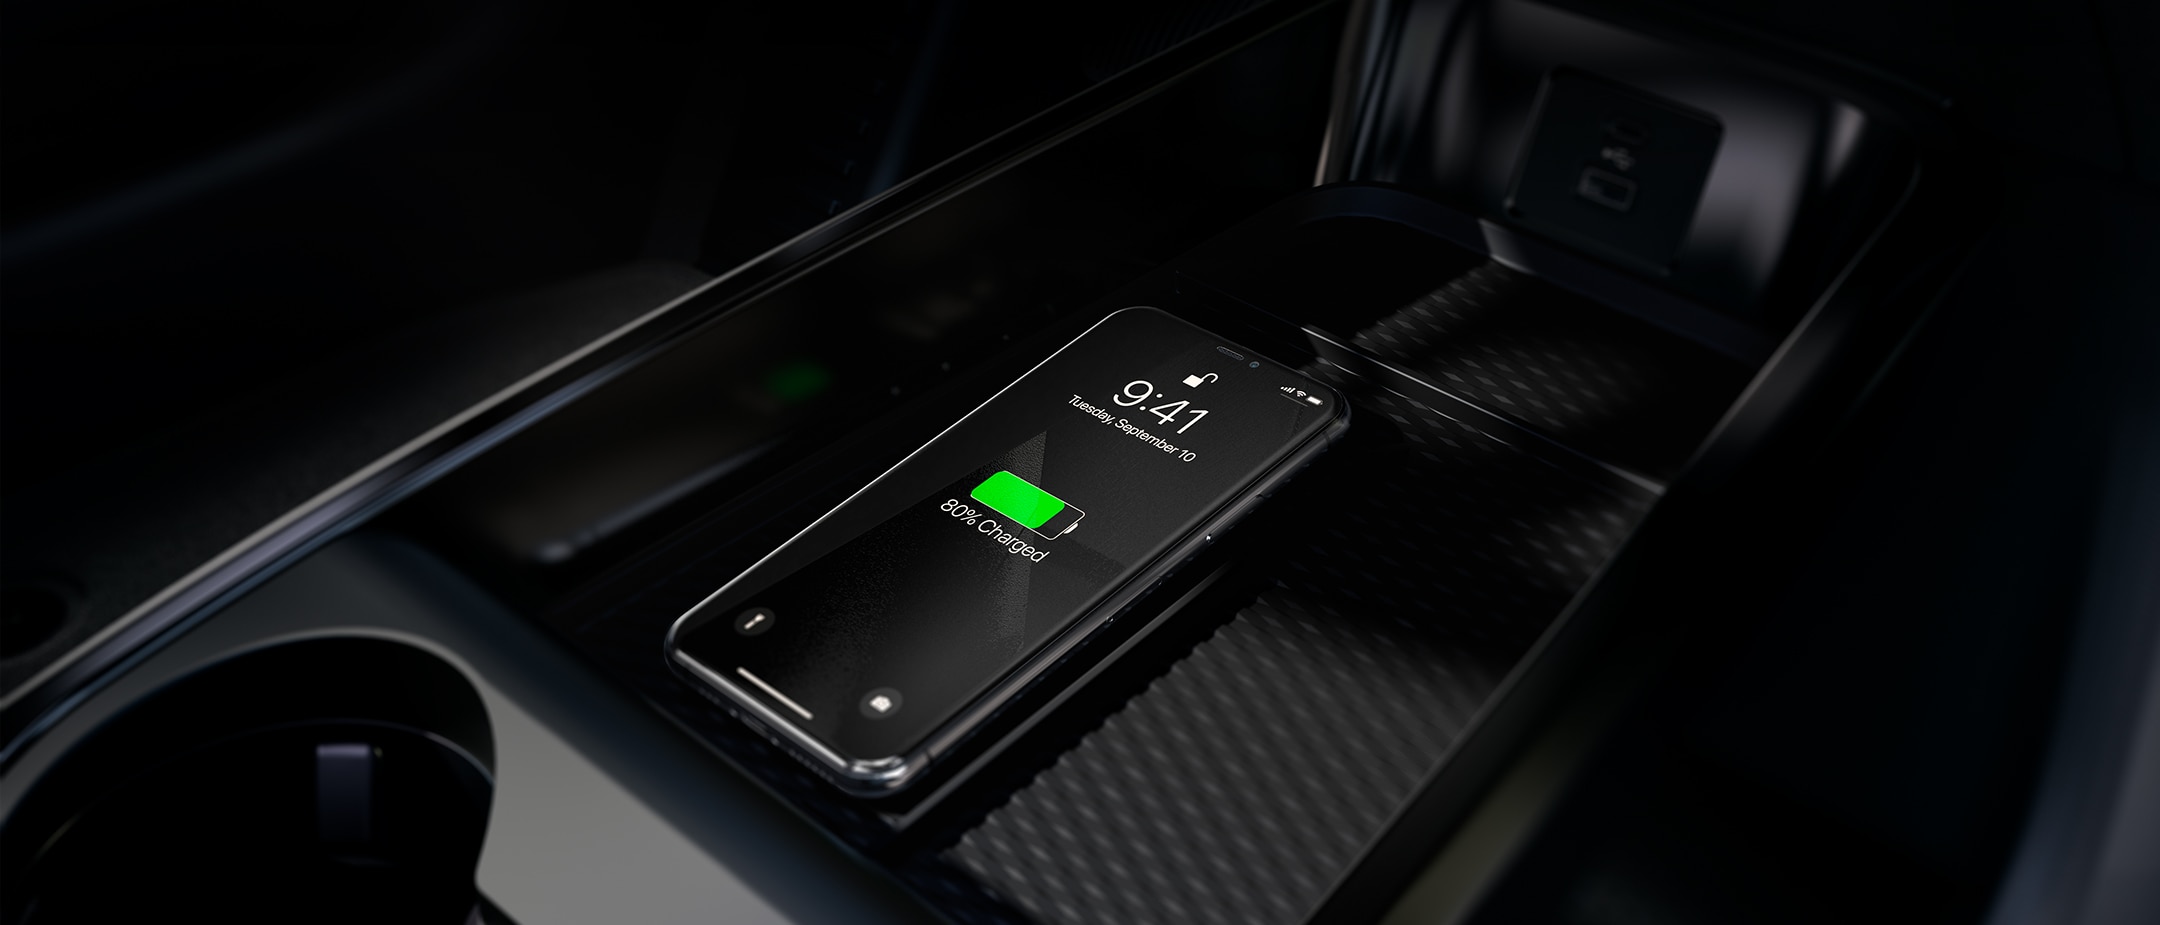 A smartphone charging in a Ford vehicle